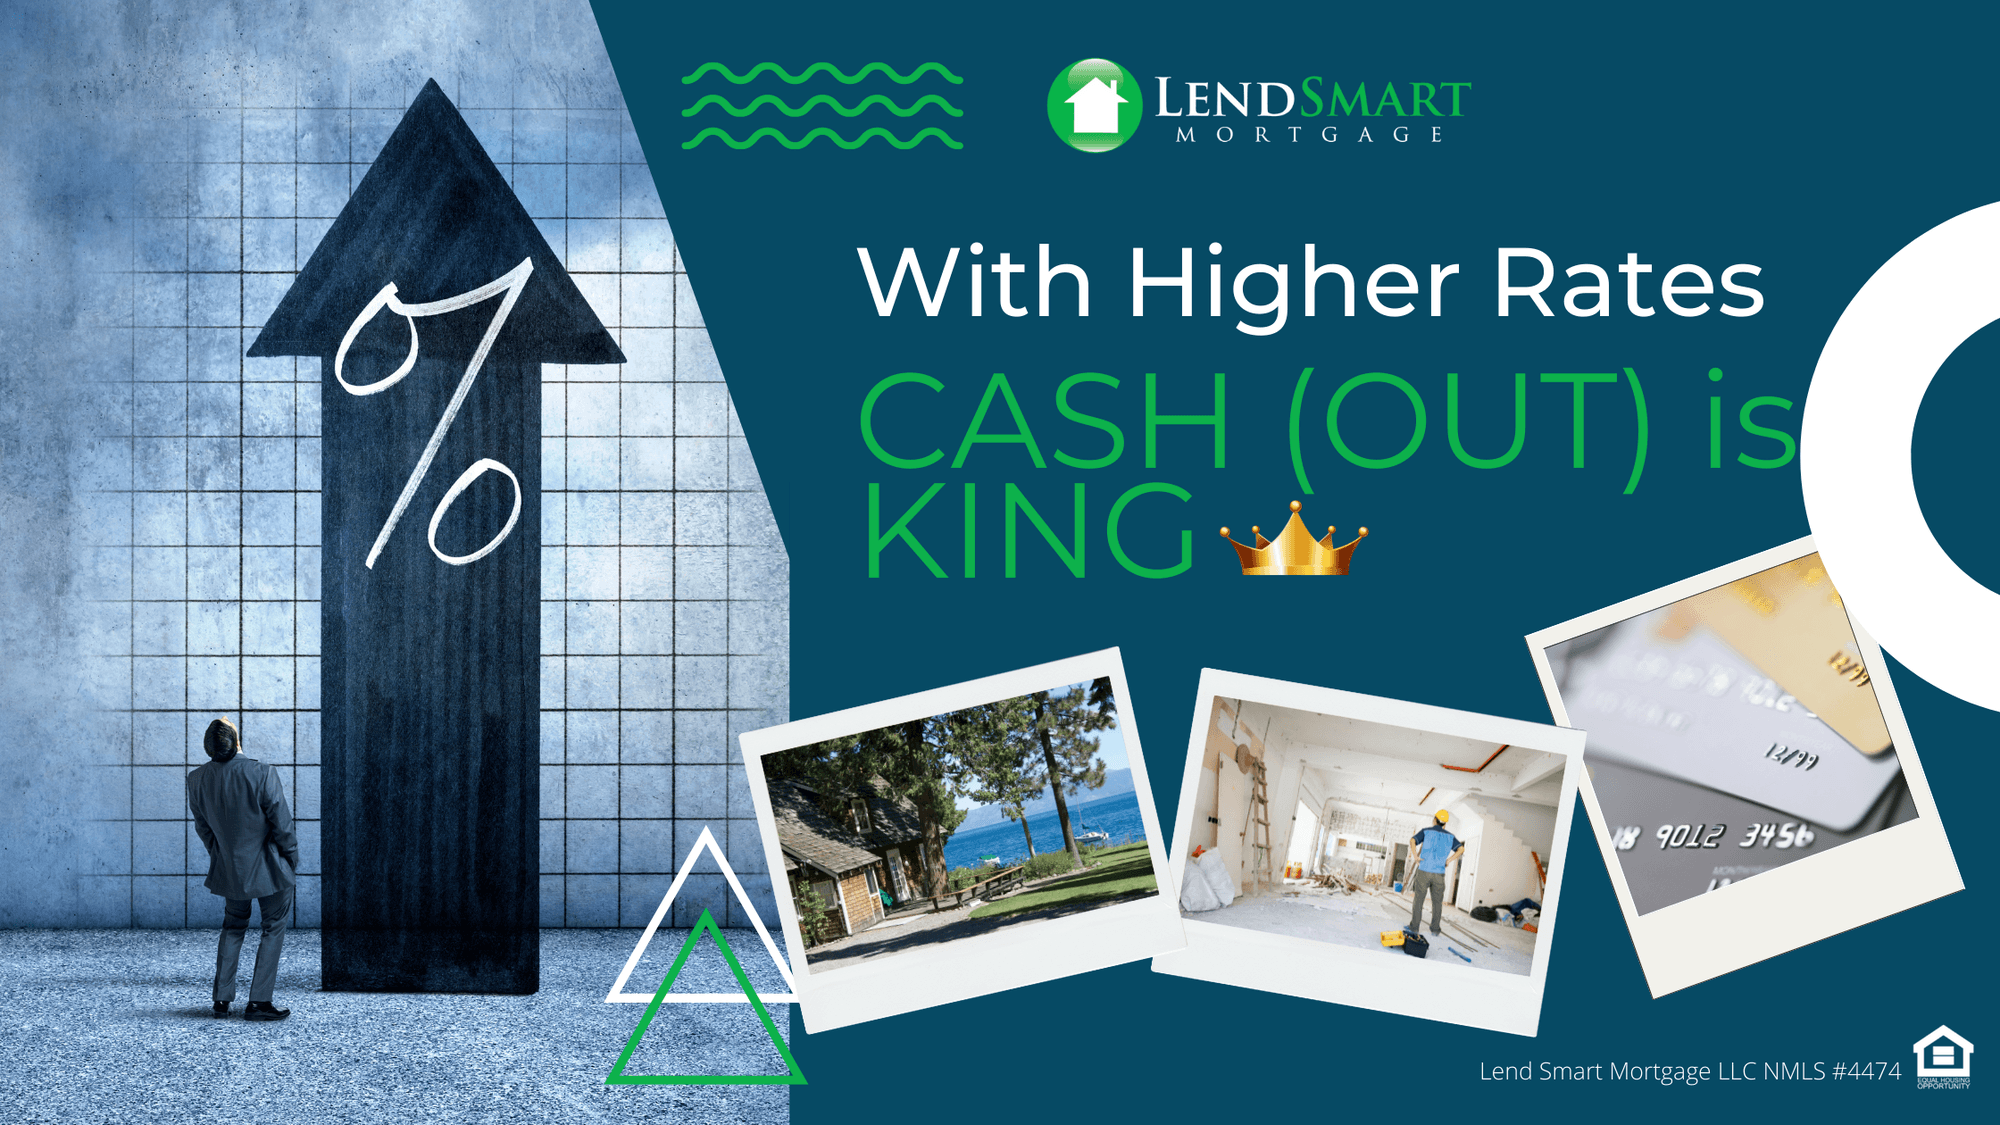 With Higher Mortgage Rates Cash (Out) is King